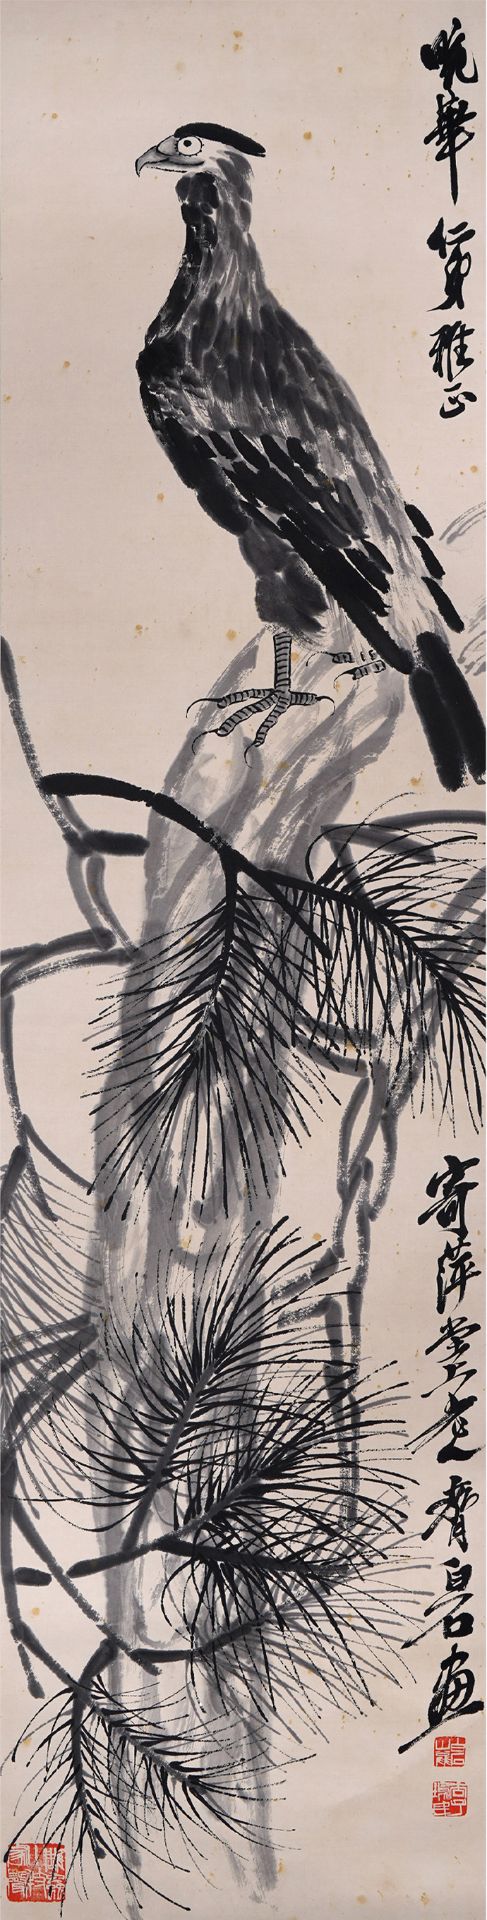 A Chinese Scroll Painting by Qi Baishi - Image 2 of 11